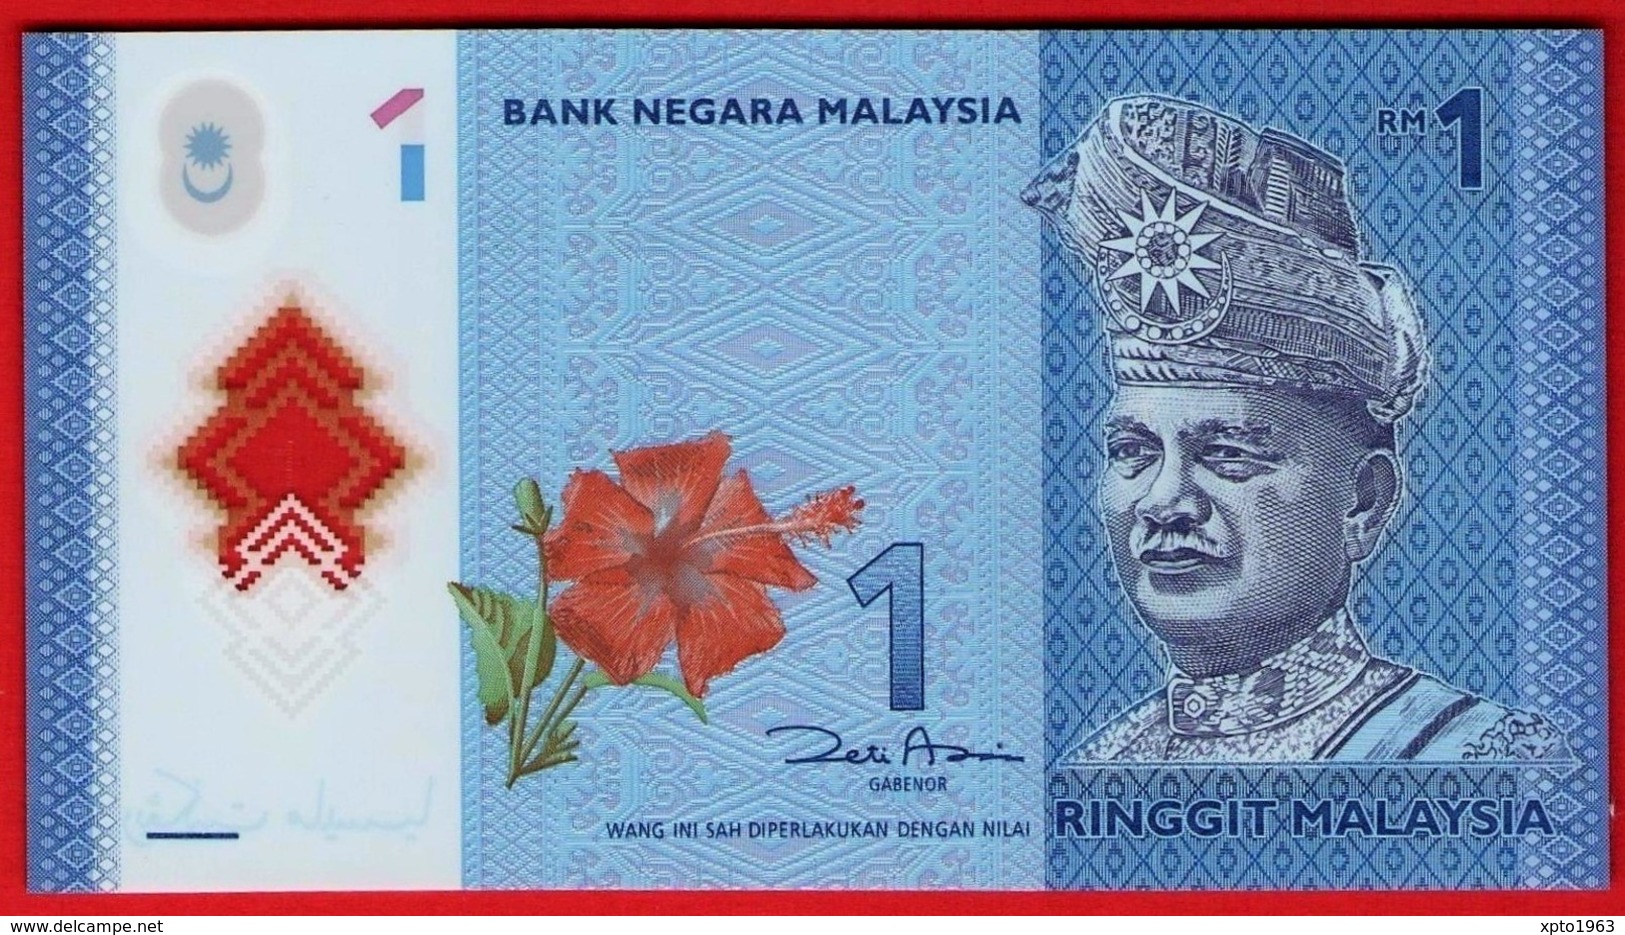 Malaysia 1 Ringgit RM1 (2012) / JC/JB SAME NUMBER 6666655 - P51 Pair - Polymer UNC FDS NEUF - Maleisië